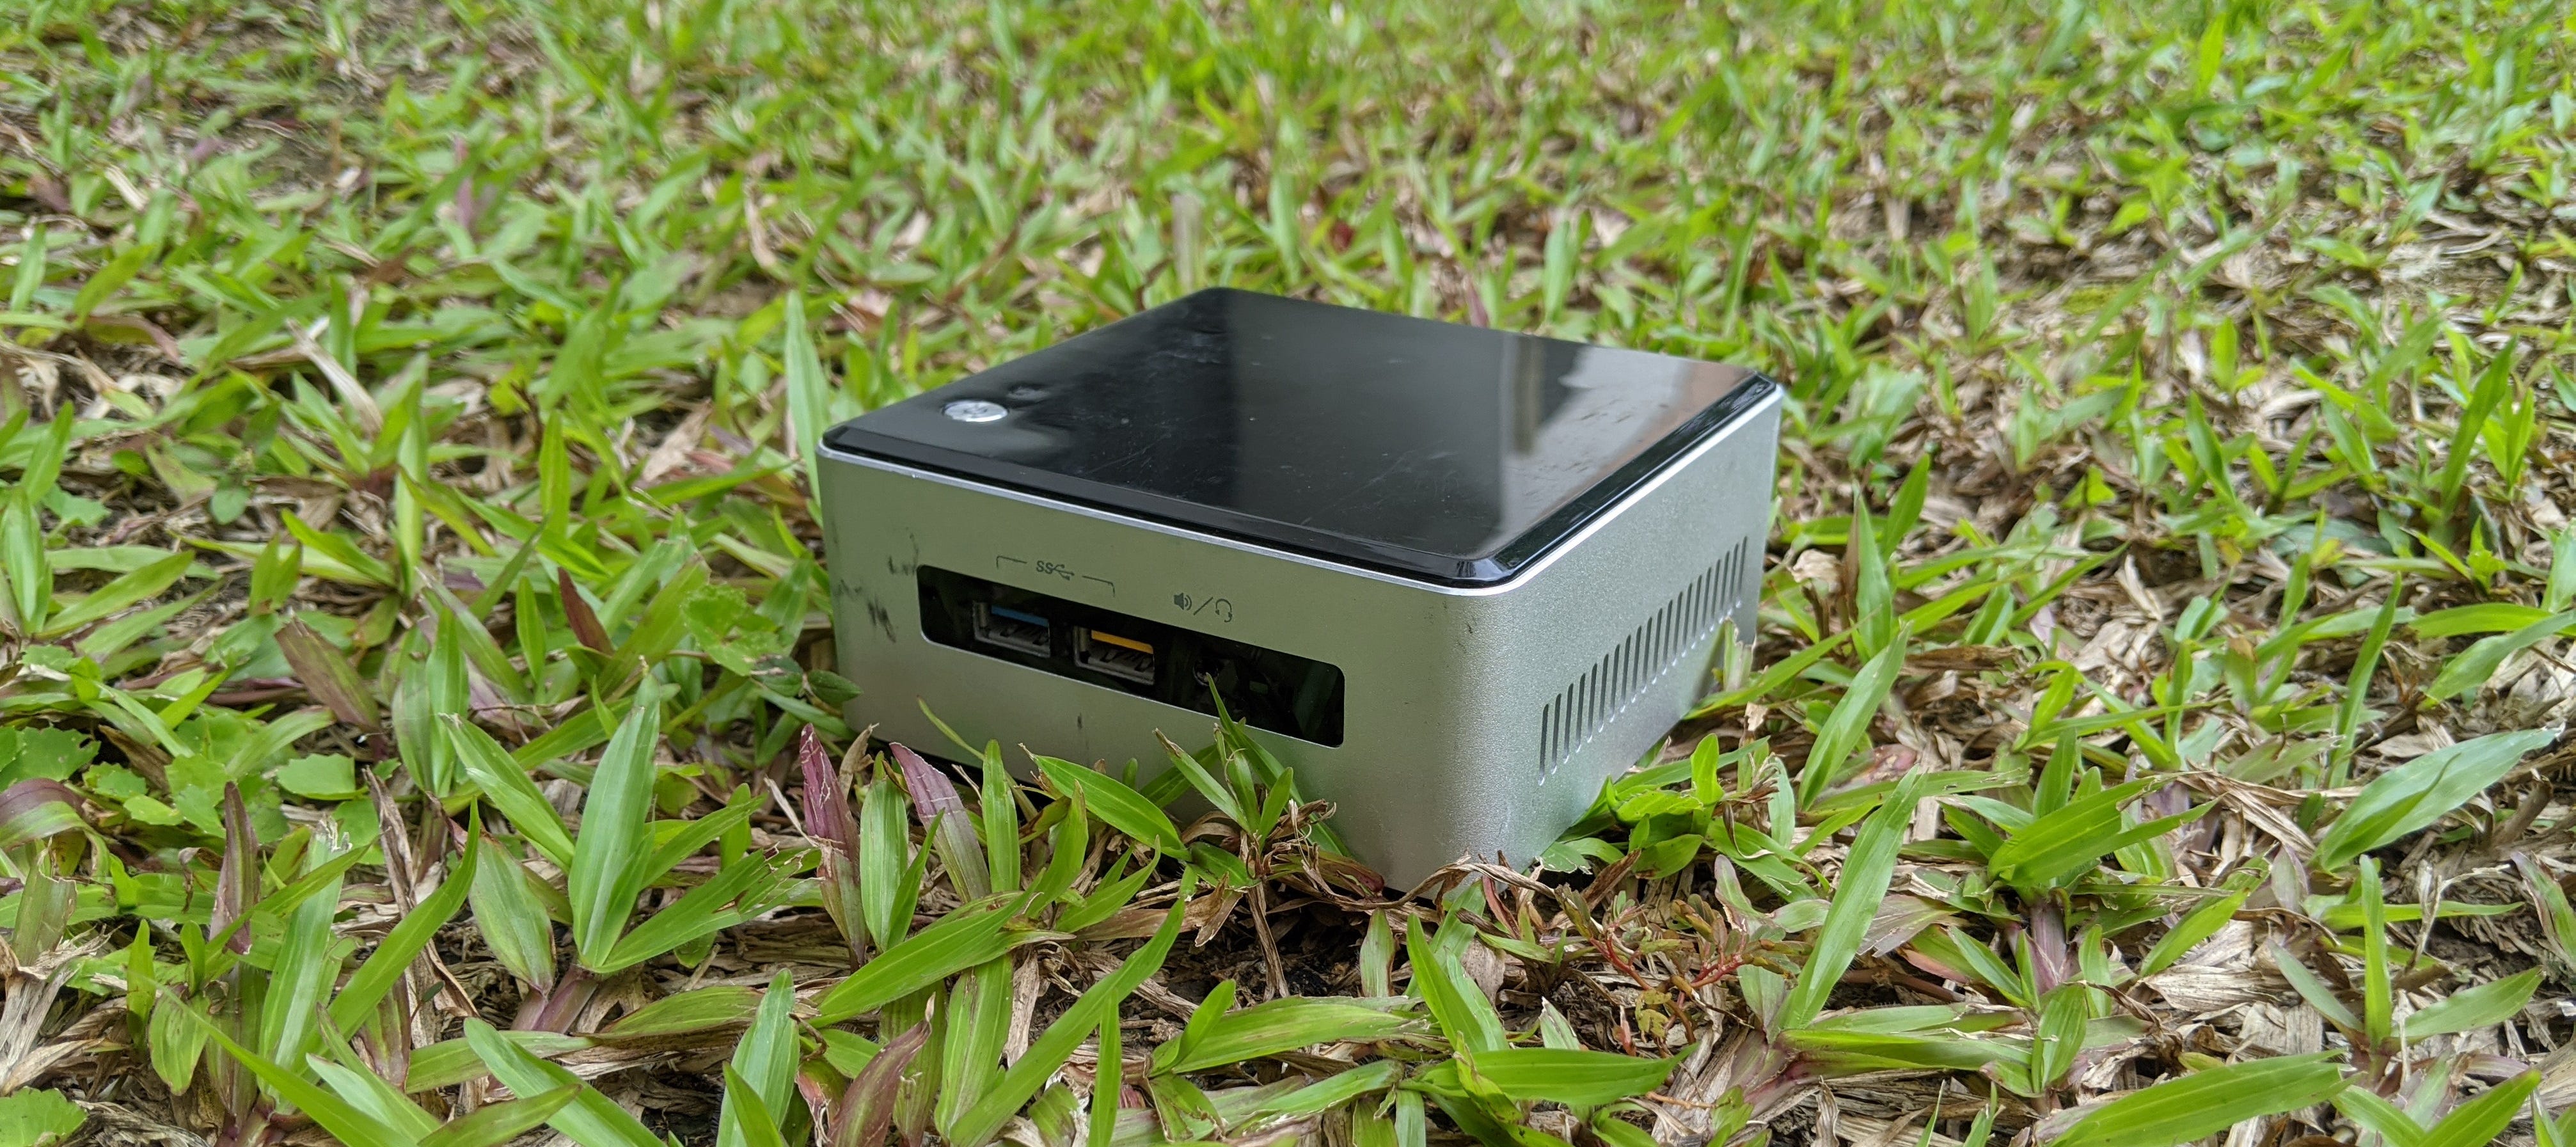 I'm NUC Done Yet — Breathing New Life Into an Old Machine